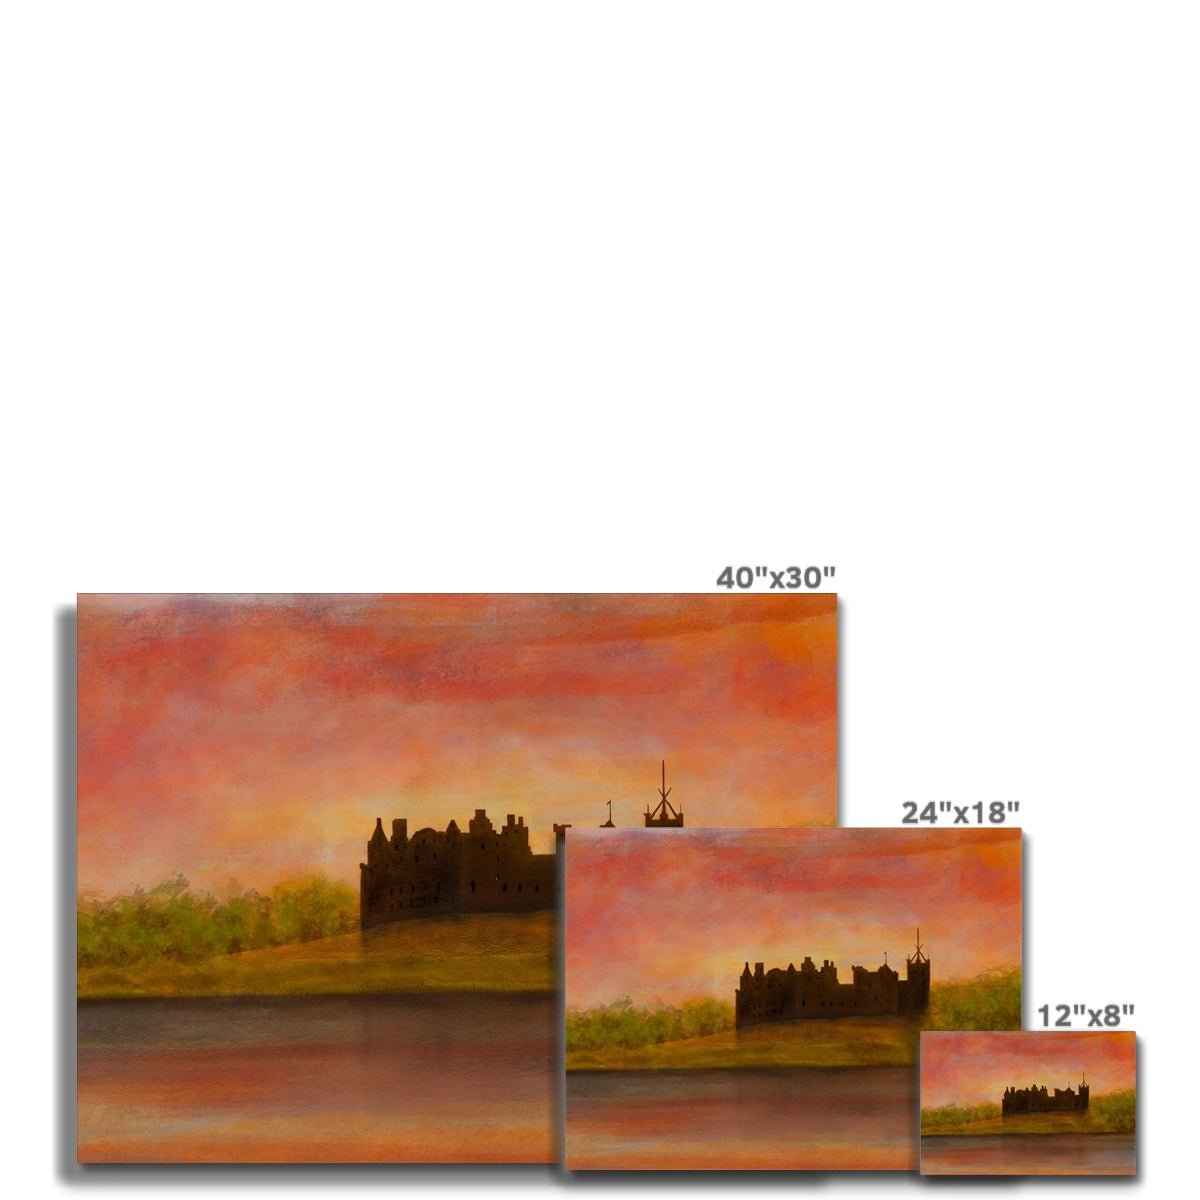 Linlithgow Palace Dusk Painting | Canvas From Scotland-Contemporary Stretched Canvas Prints-Historic & Iconic Scotland Art Gallery-Paintings, Prints, Homeware, Art Gifts From Scotland By Scottish Artist Kevin Hunter